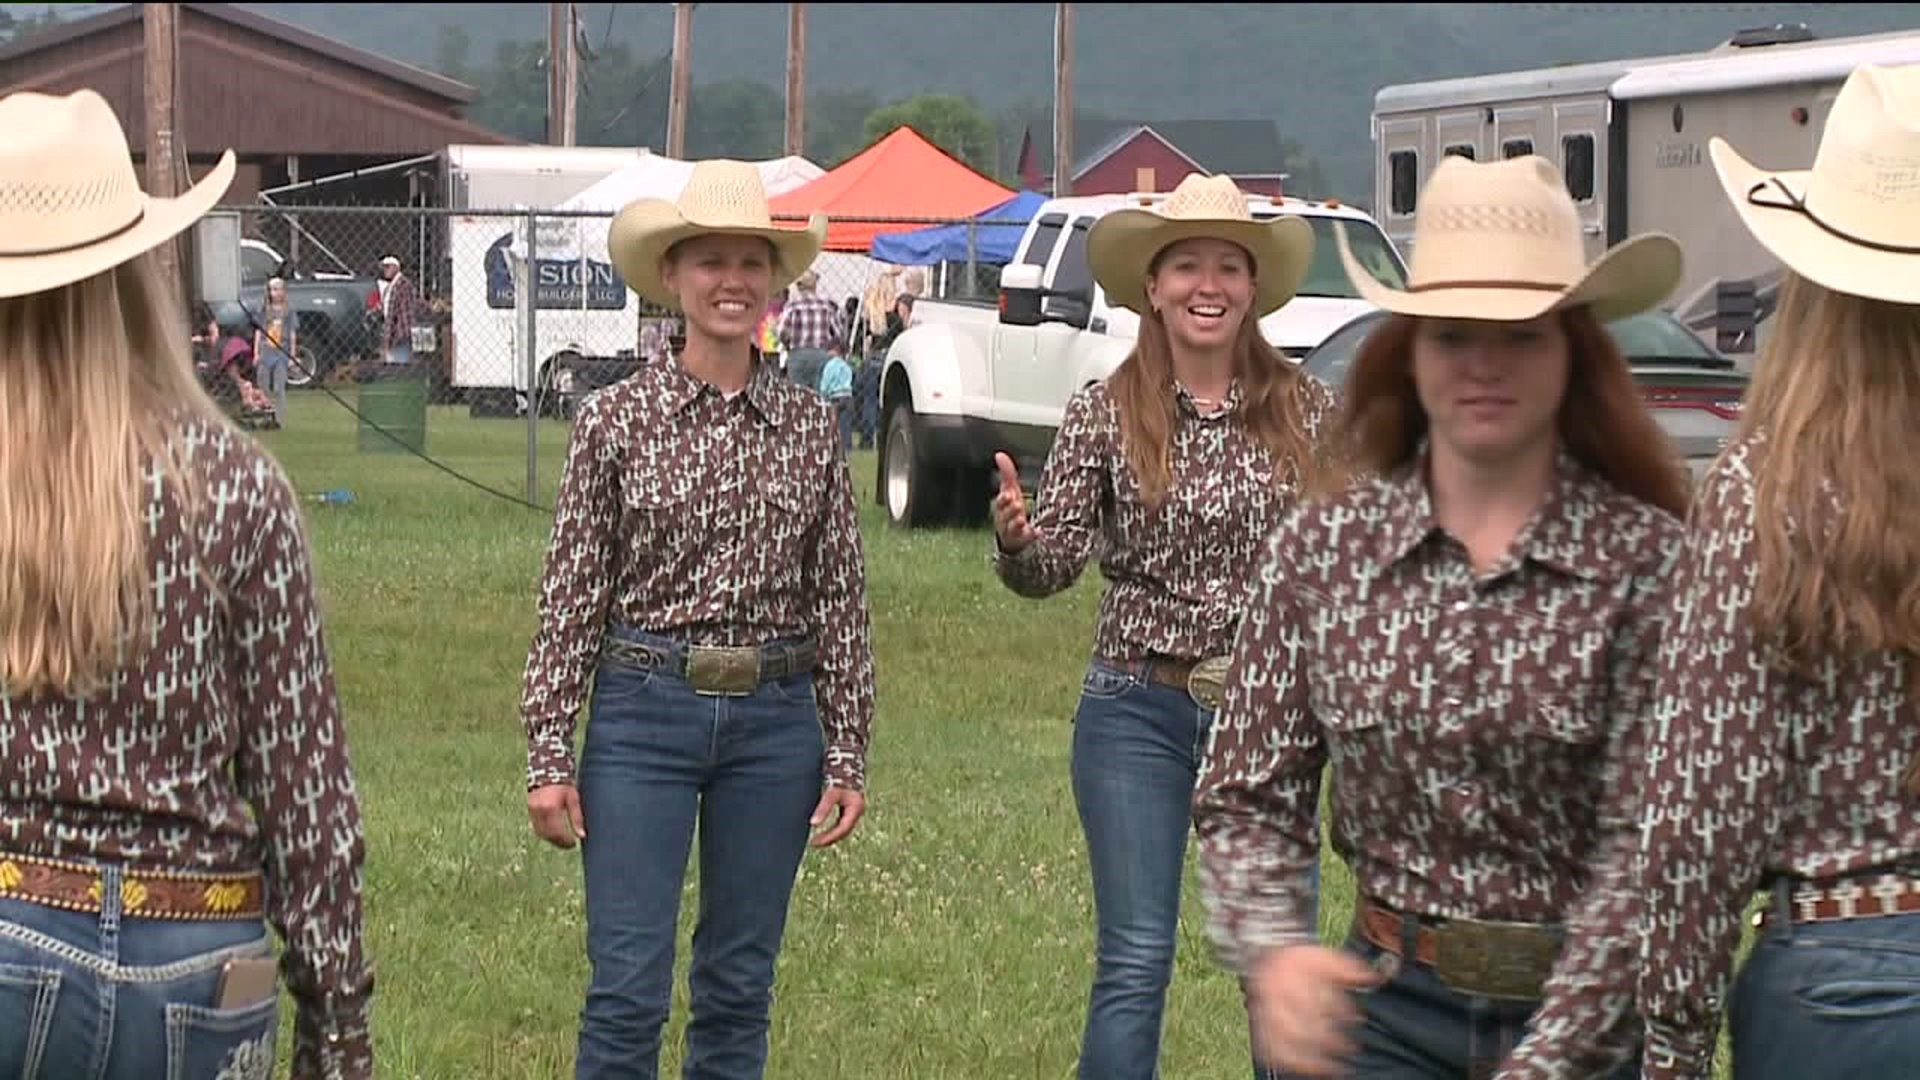 35th Annual Frontier Days Celebration At The Benton Rodeo